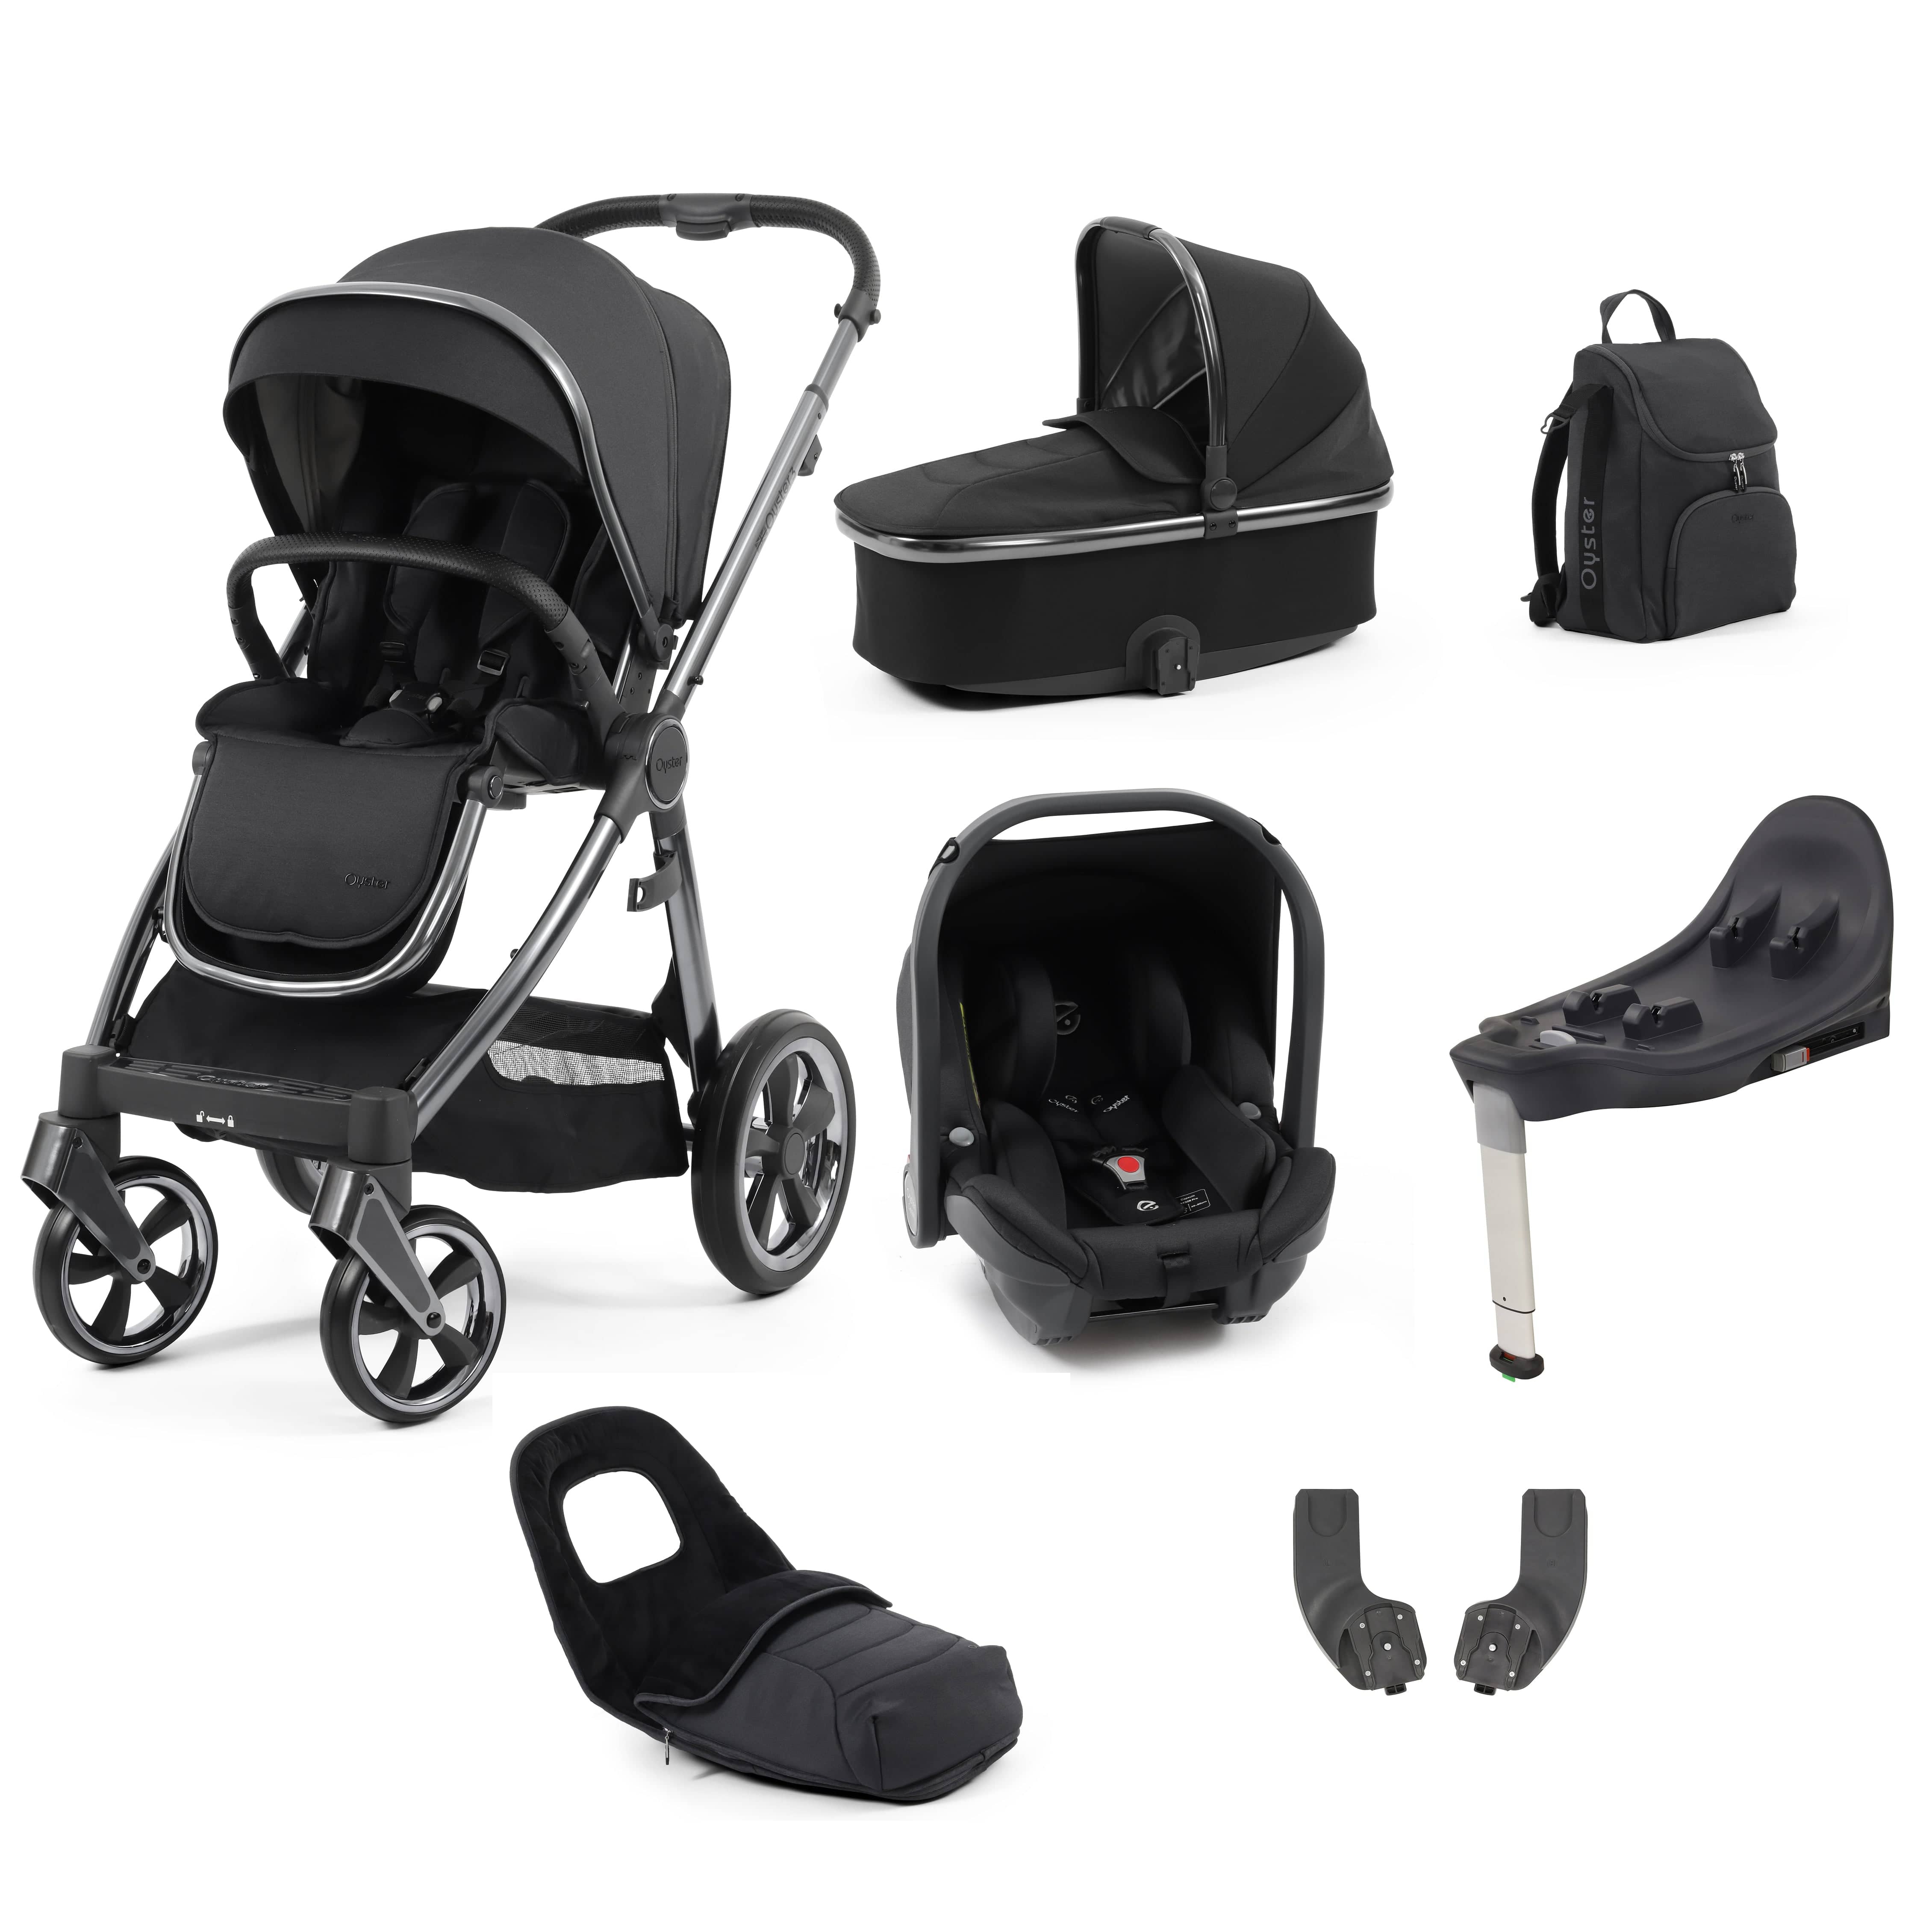 Babystyle Oyster 3 Luxury 7 Piece with Car Seat Bundle in Carbonite Travel Systems 14771-CRB 5060711567242